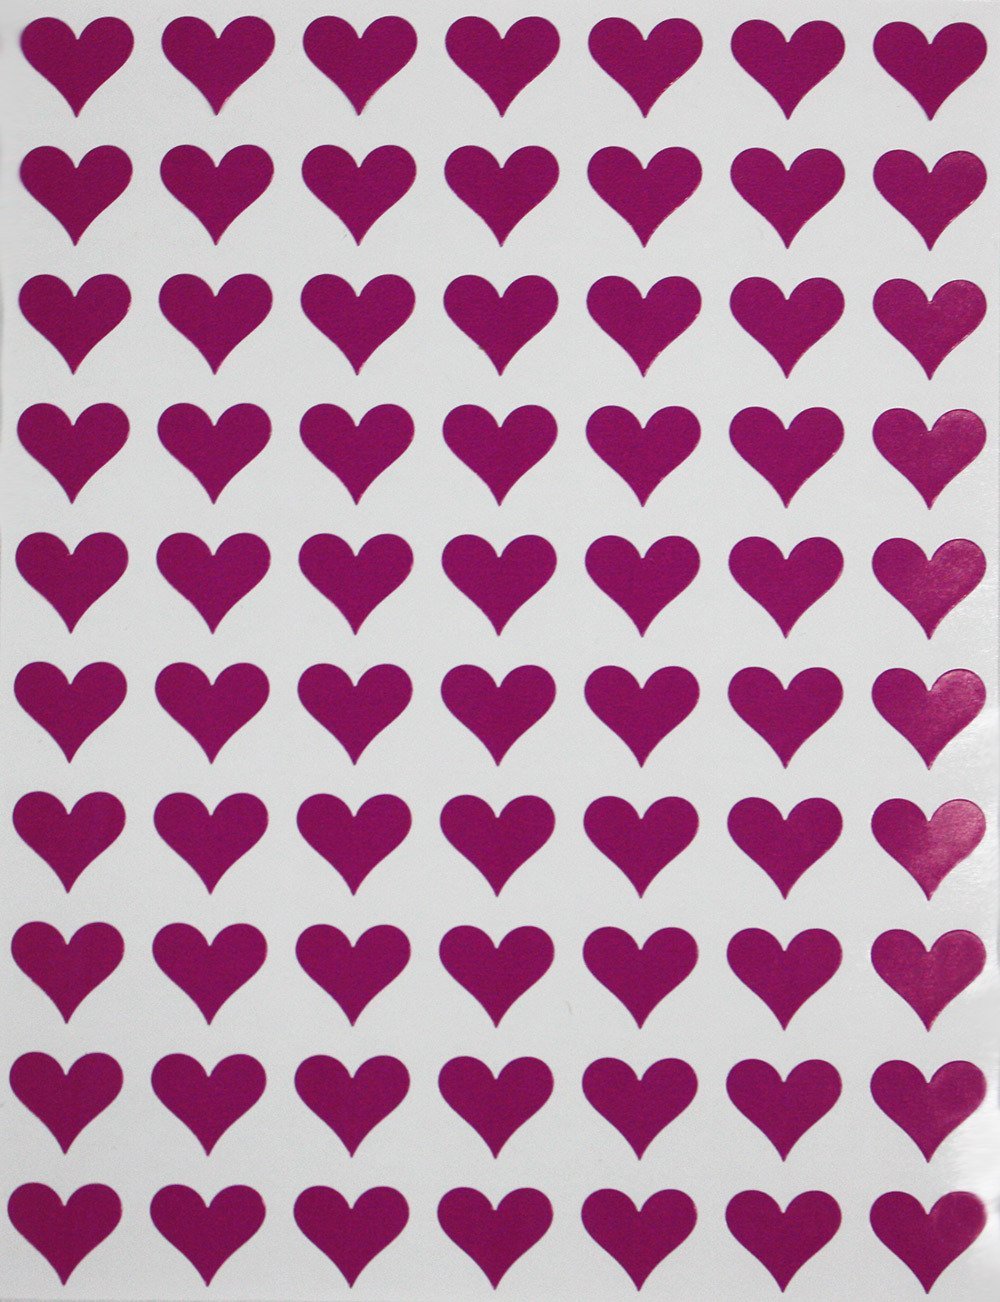 Heart Stickers 1/2 inch Label Rolls 13mm 1250 / Rose Gold